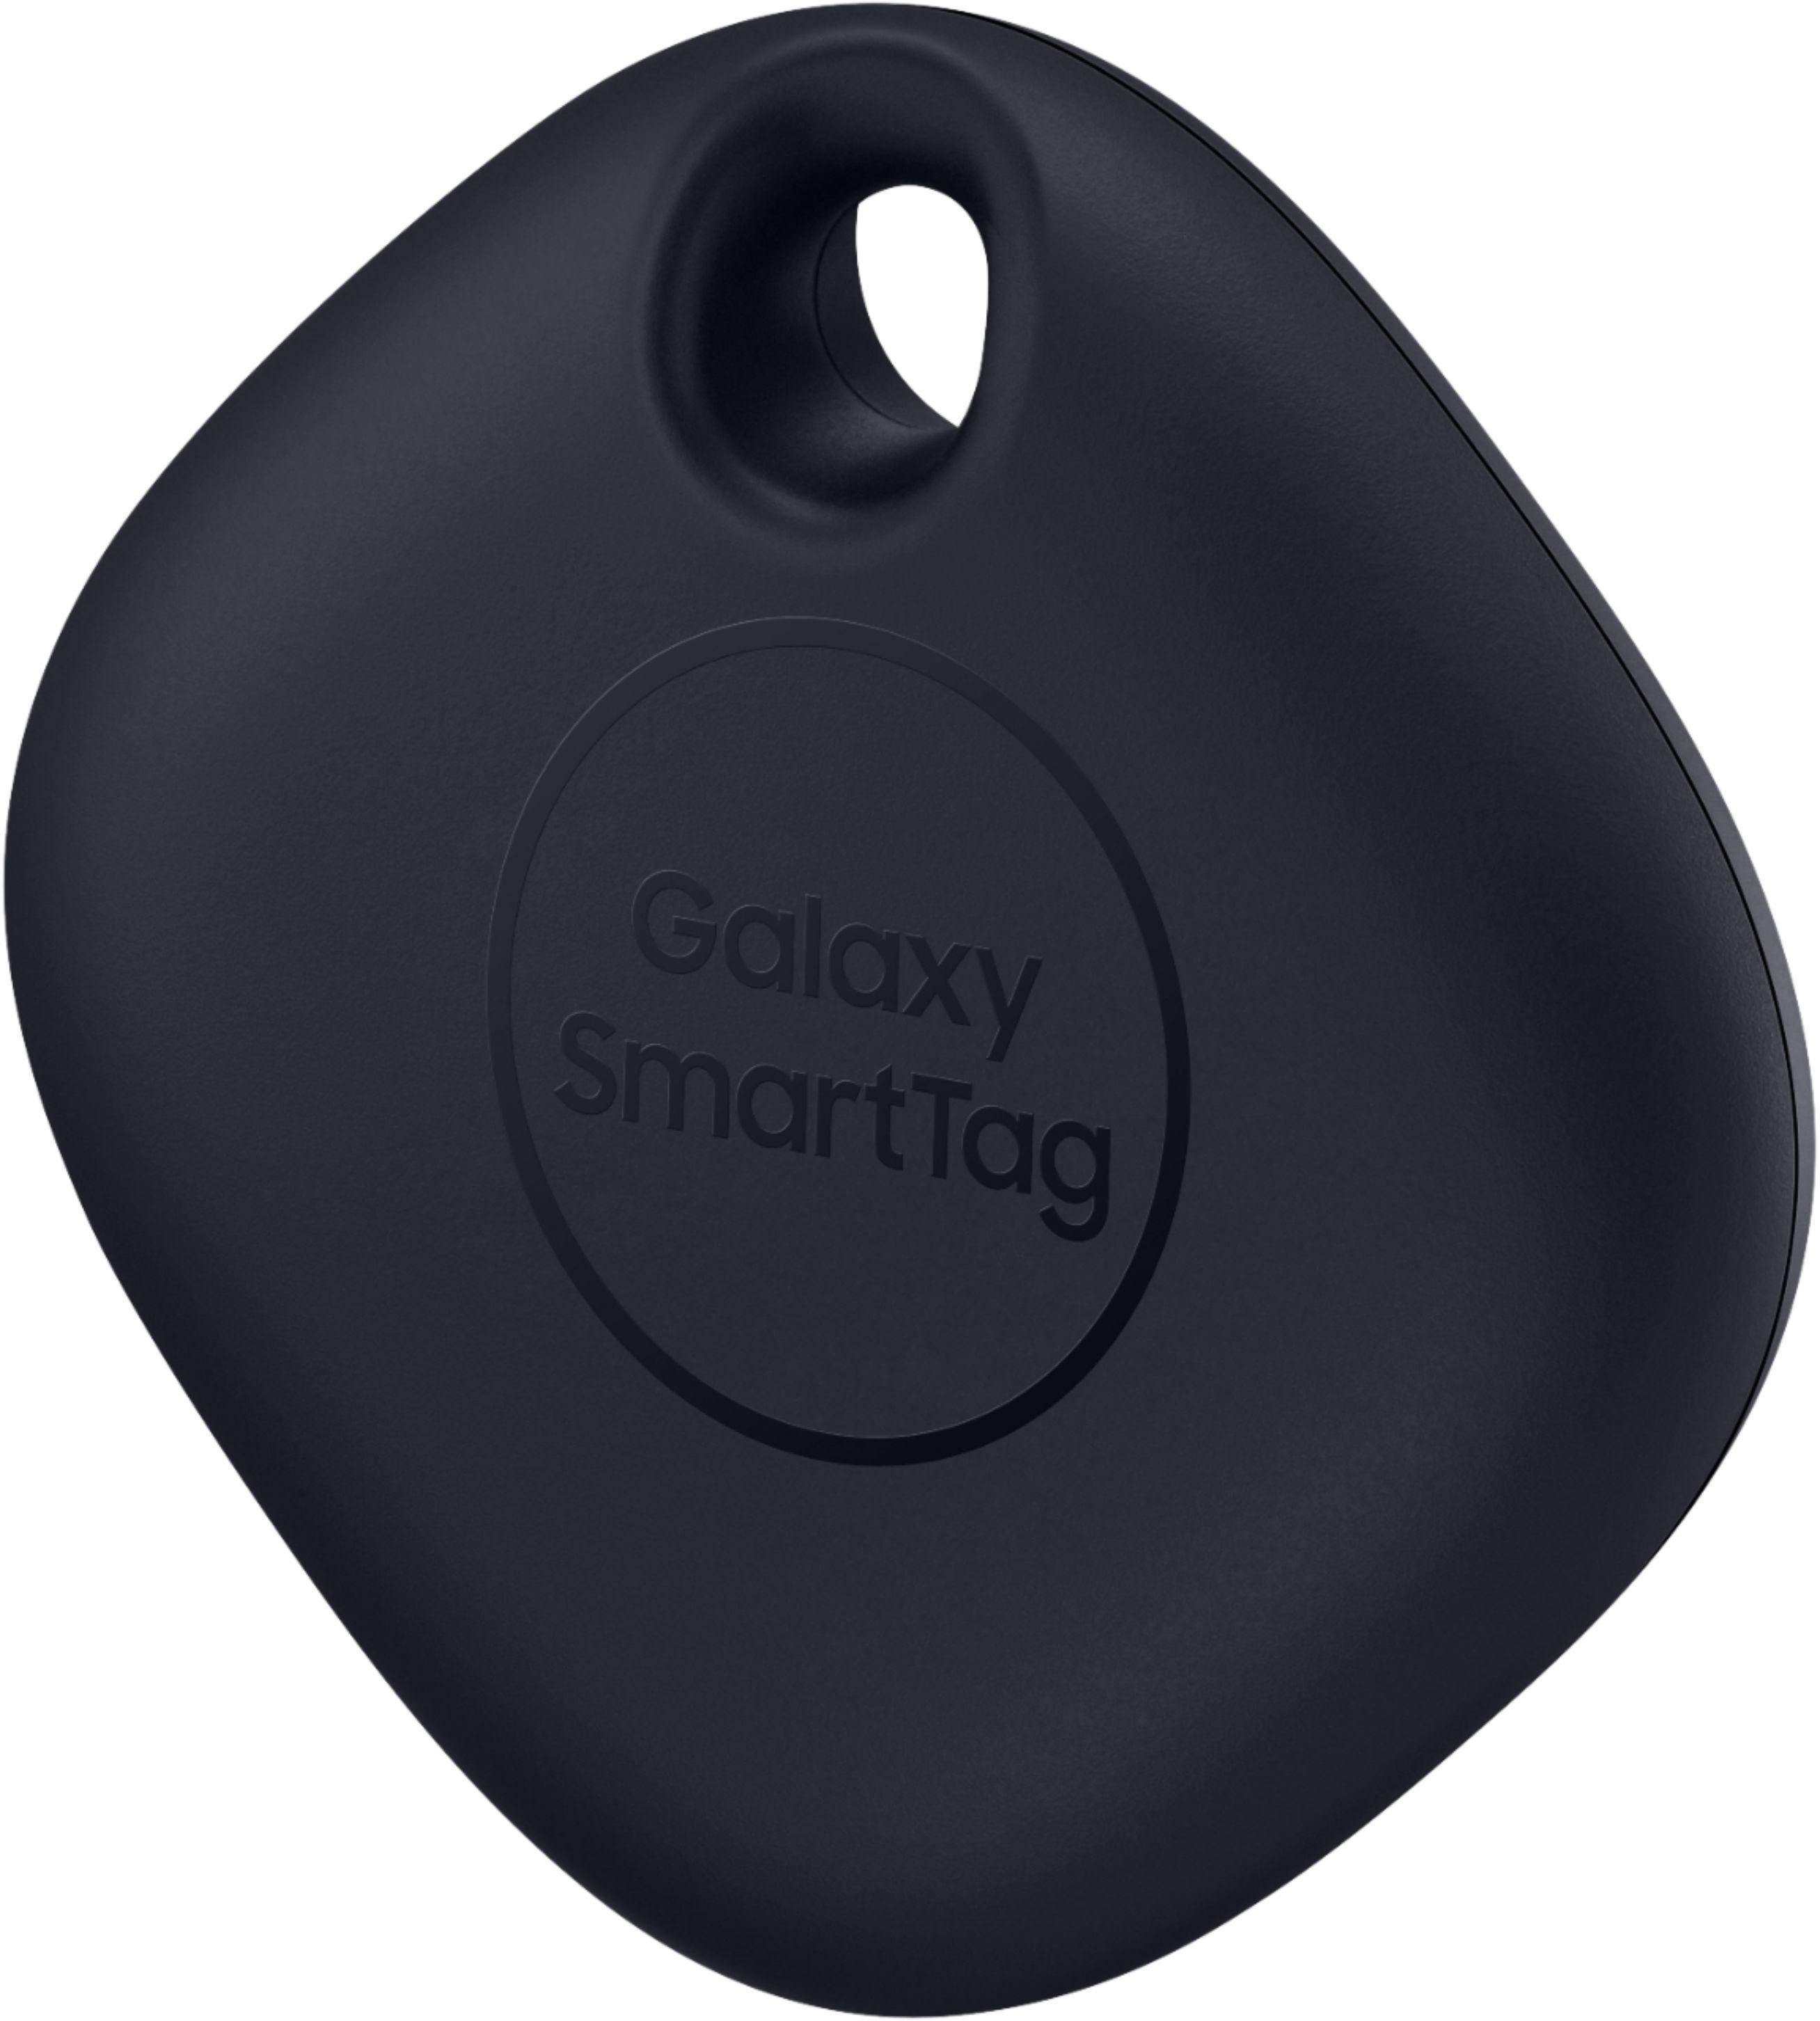 Samsung Galaxy Smart Tag and Made It WATERPROOF in 2 minutes with